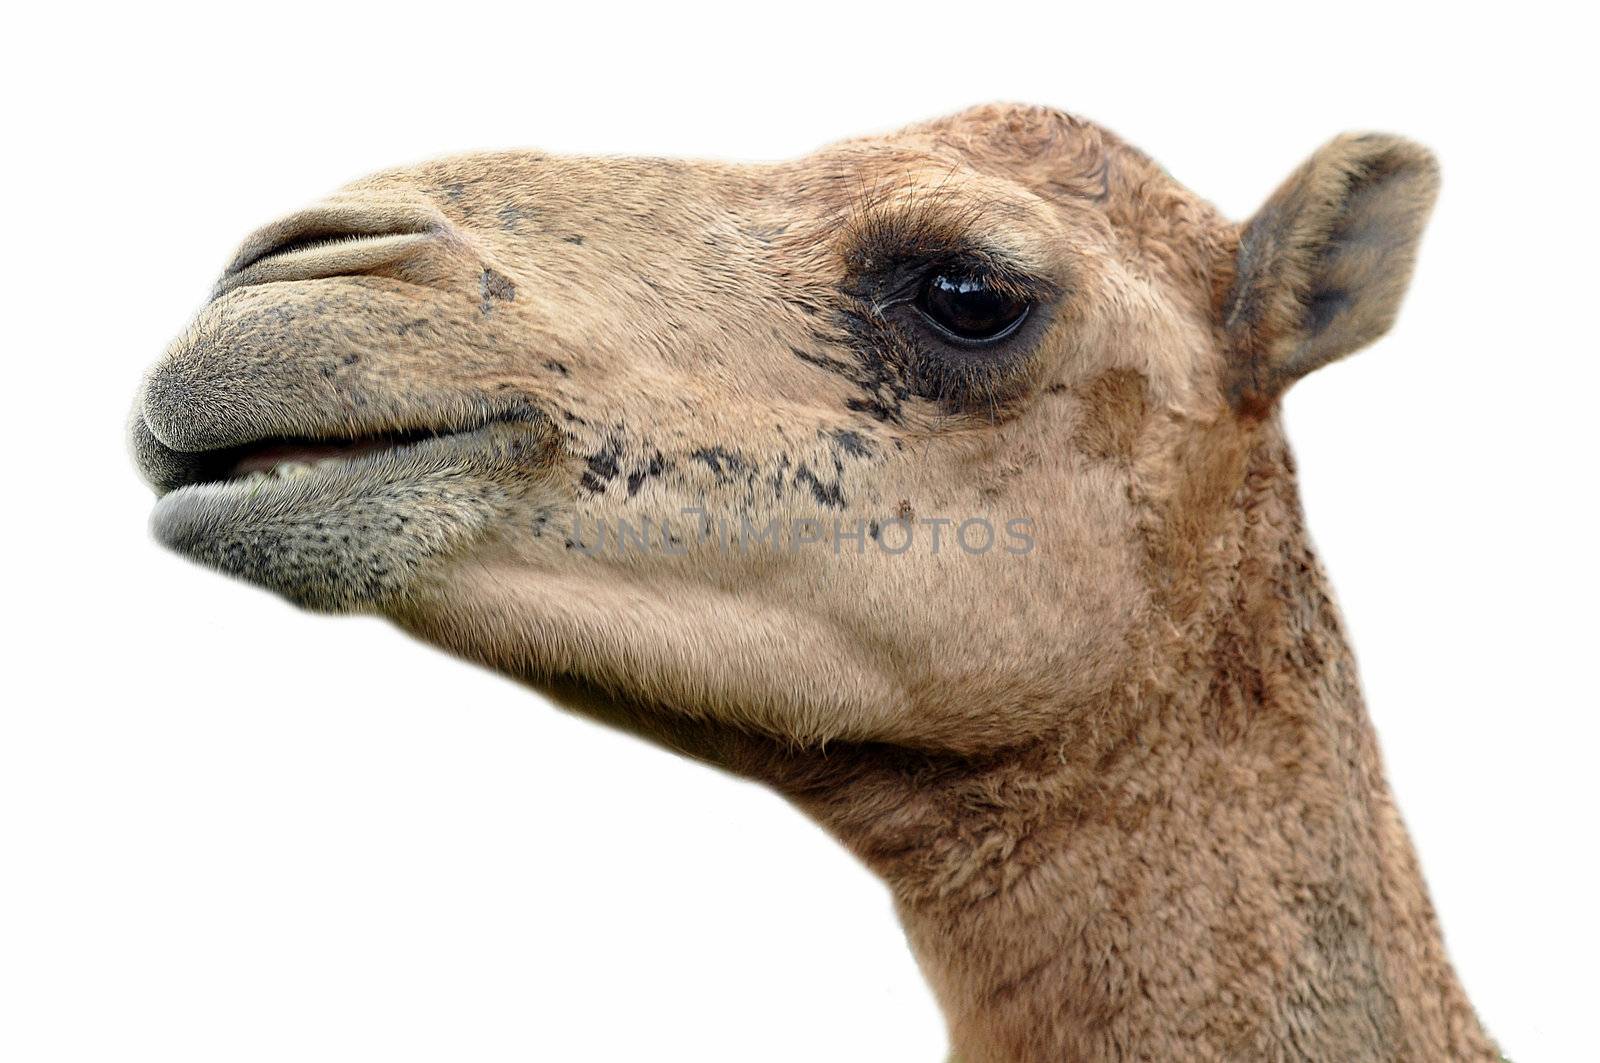 The dromedary or Arabian camel has a single hump. Dromedaries are native to the dry desert areas of West Asia.